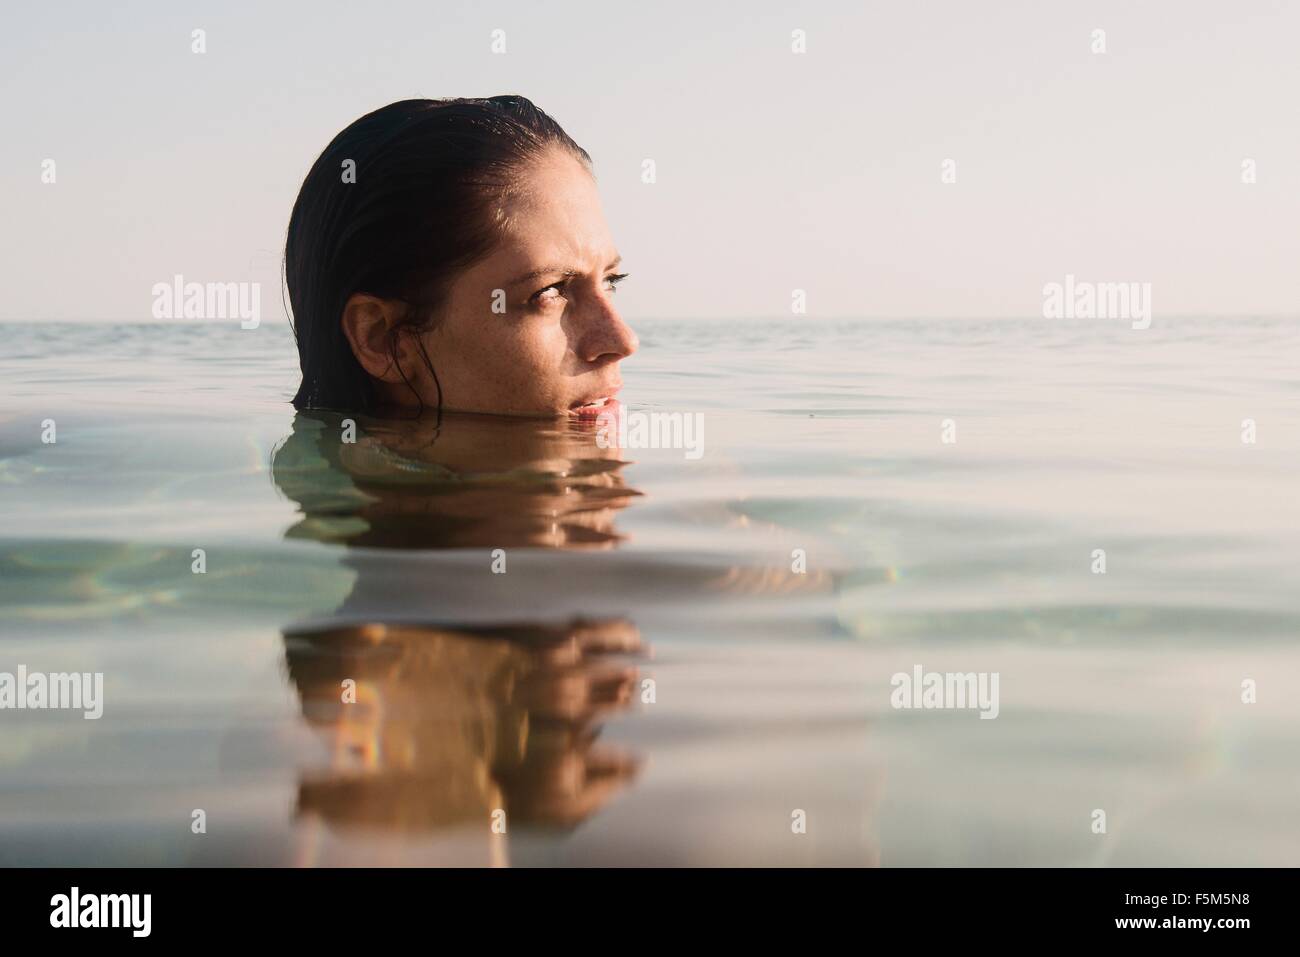 Head portrait of young woman in sea Stock Photo